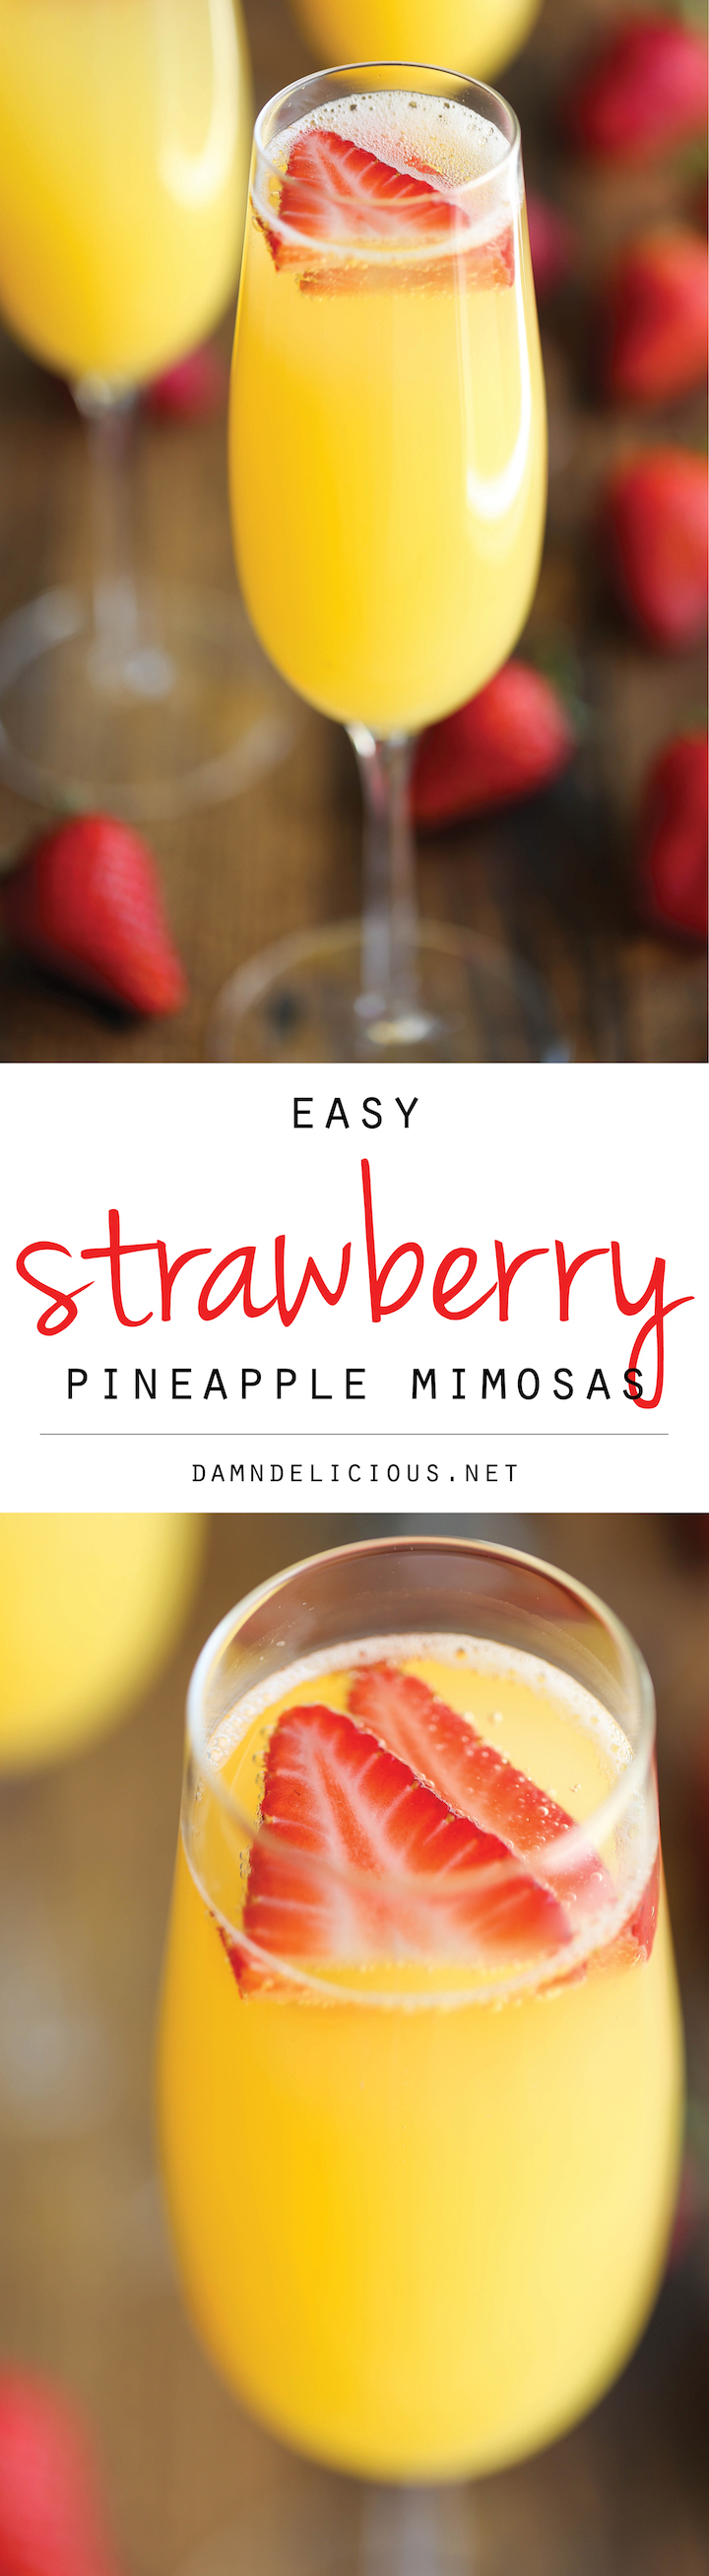 Strawberry Pineapple Mimosas - The easiest, quickest, and best 4-ingredient mimosa ever. And all you need is just 5 min to whip this up!